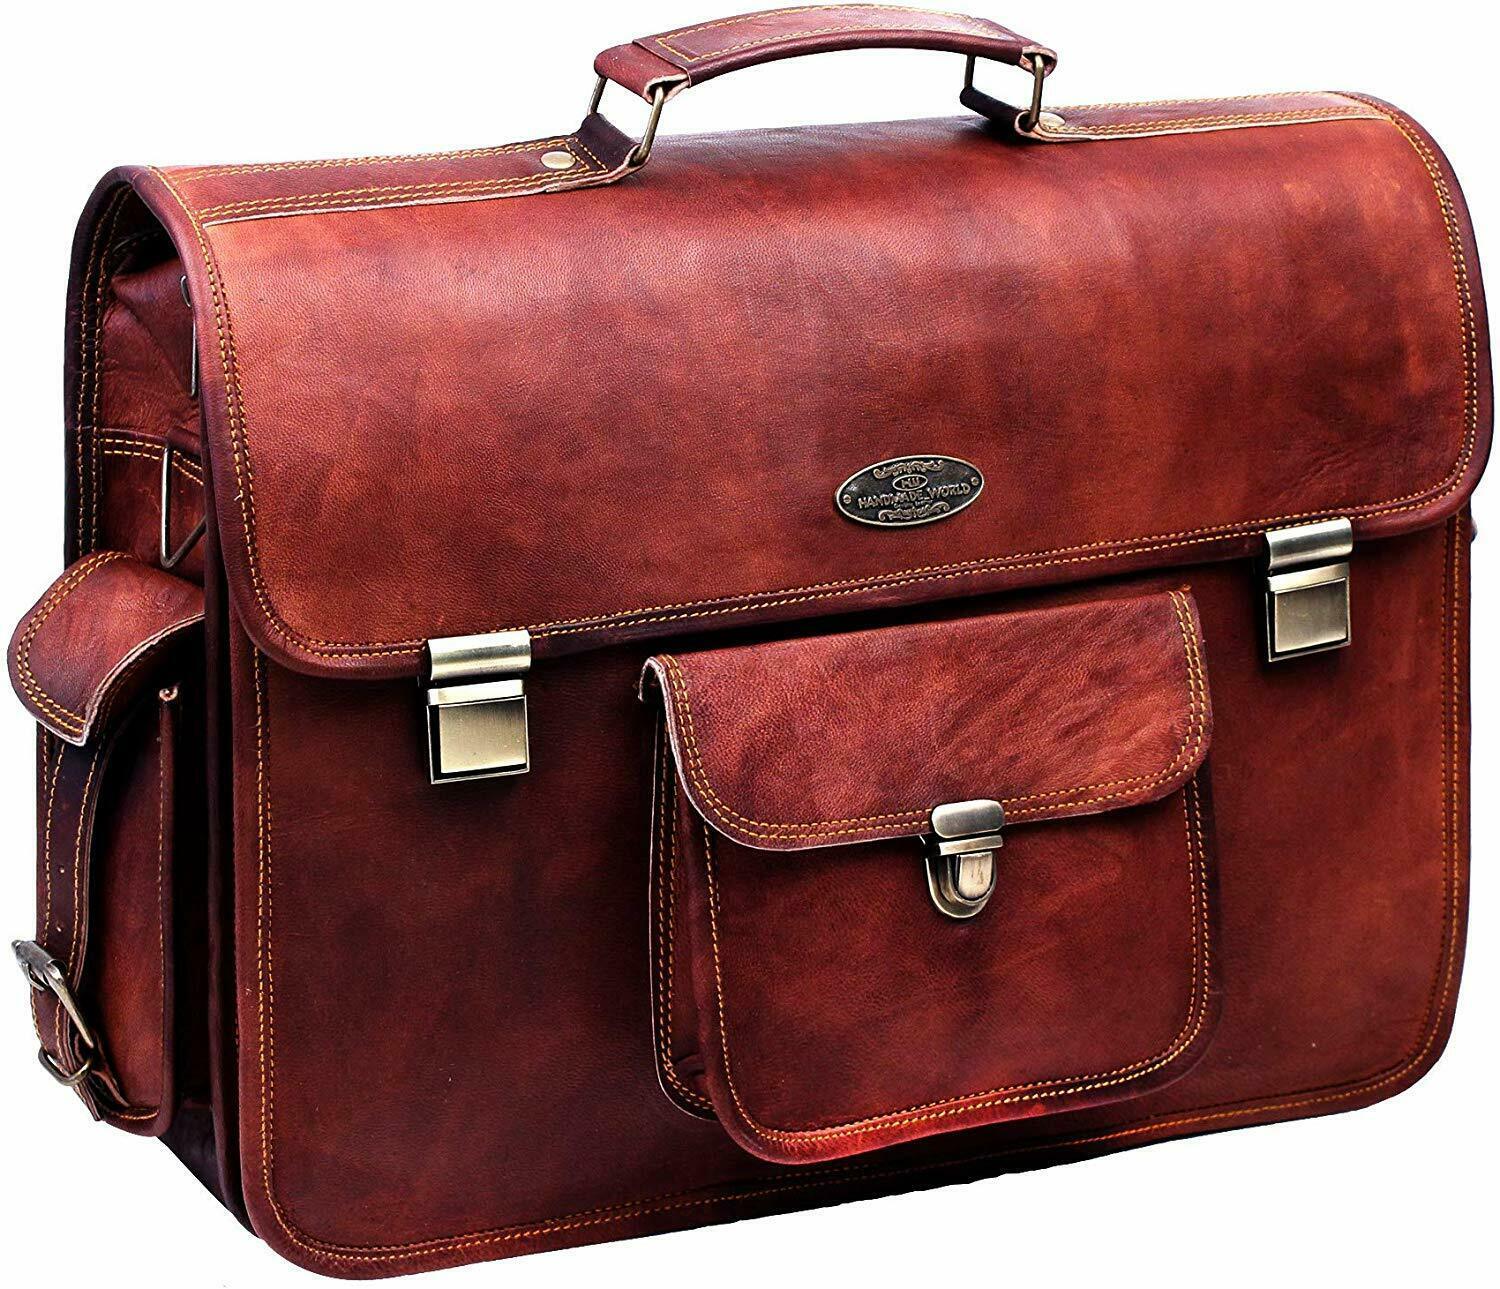 Large Leather Messenger Bag for Men 18 inches with Rustic Look Leather Briefcase - Bags